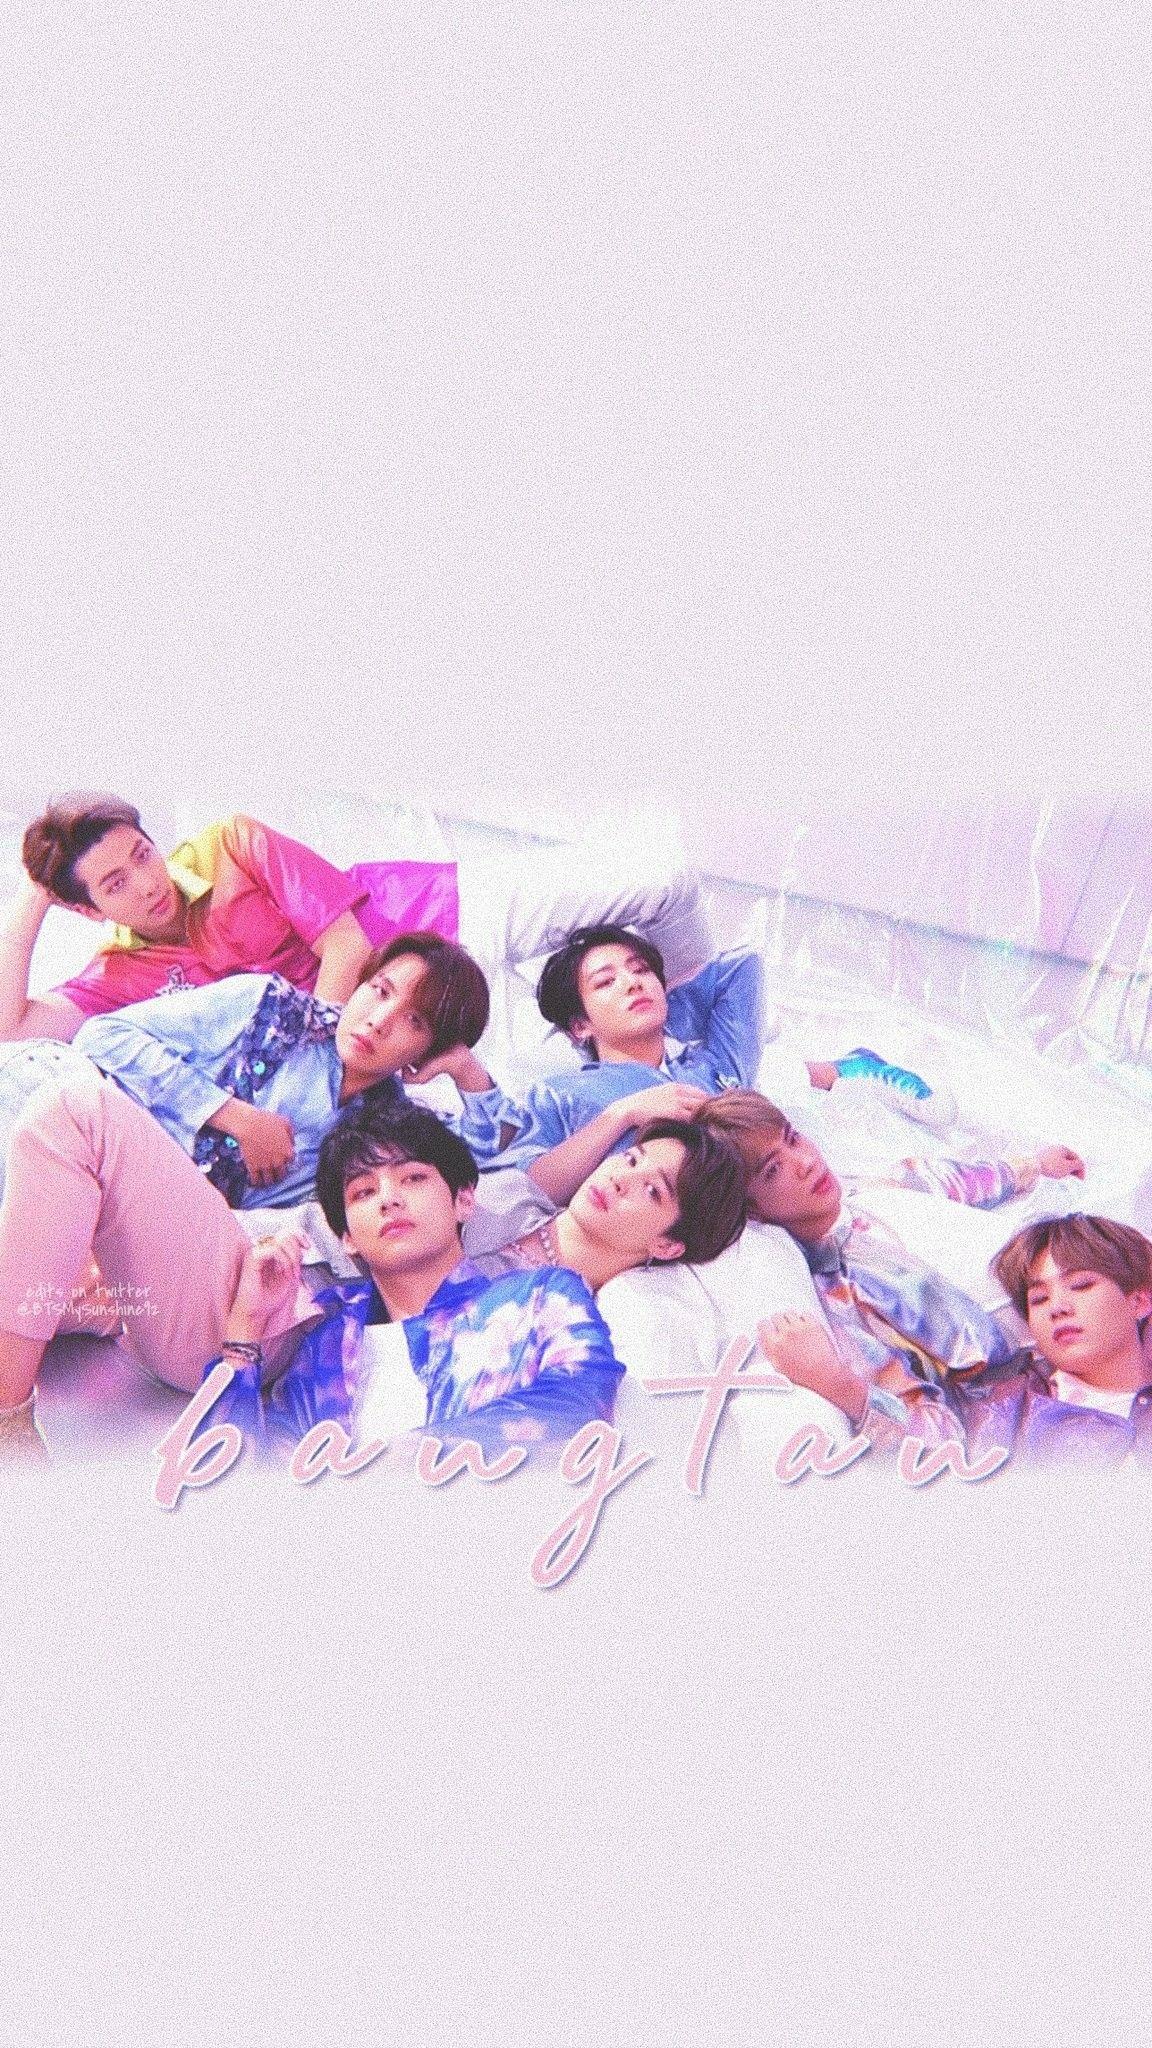 Bts Wallpapers Top Free Bts Backgrounds Wallpaperaccess